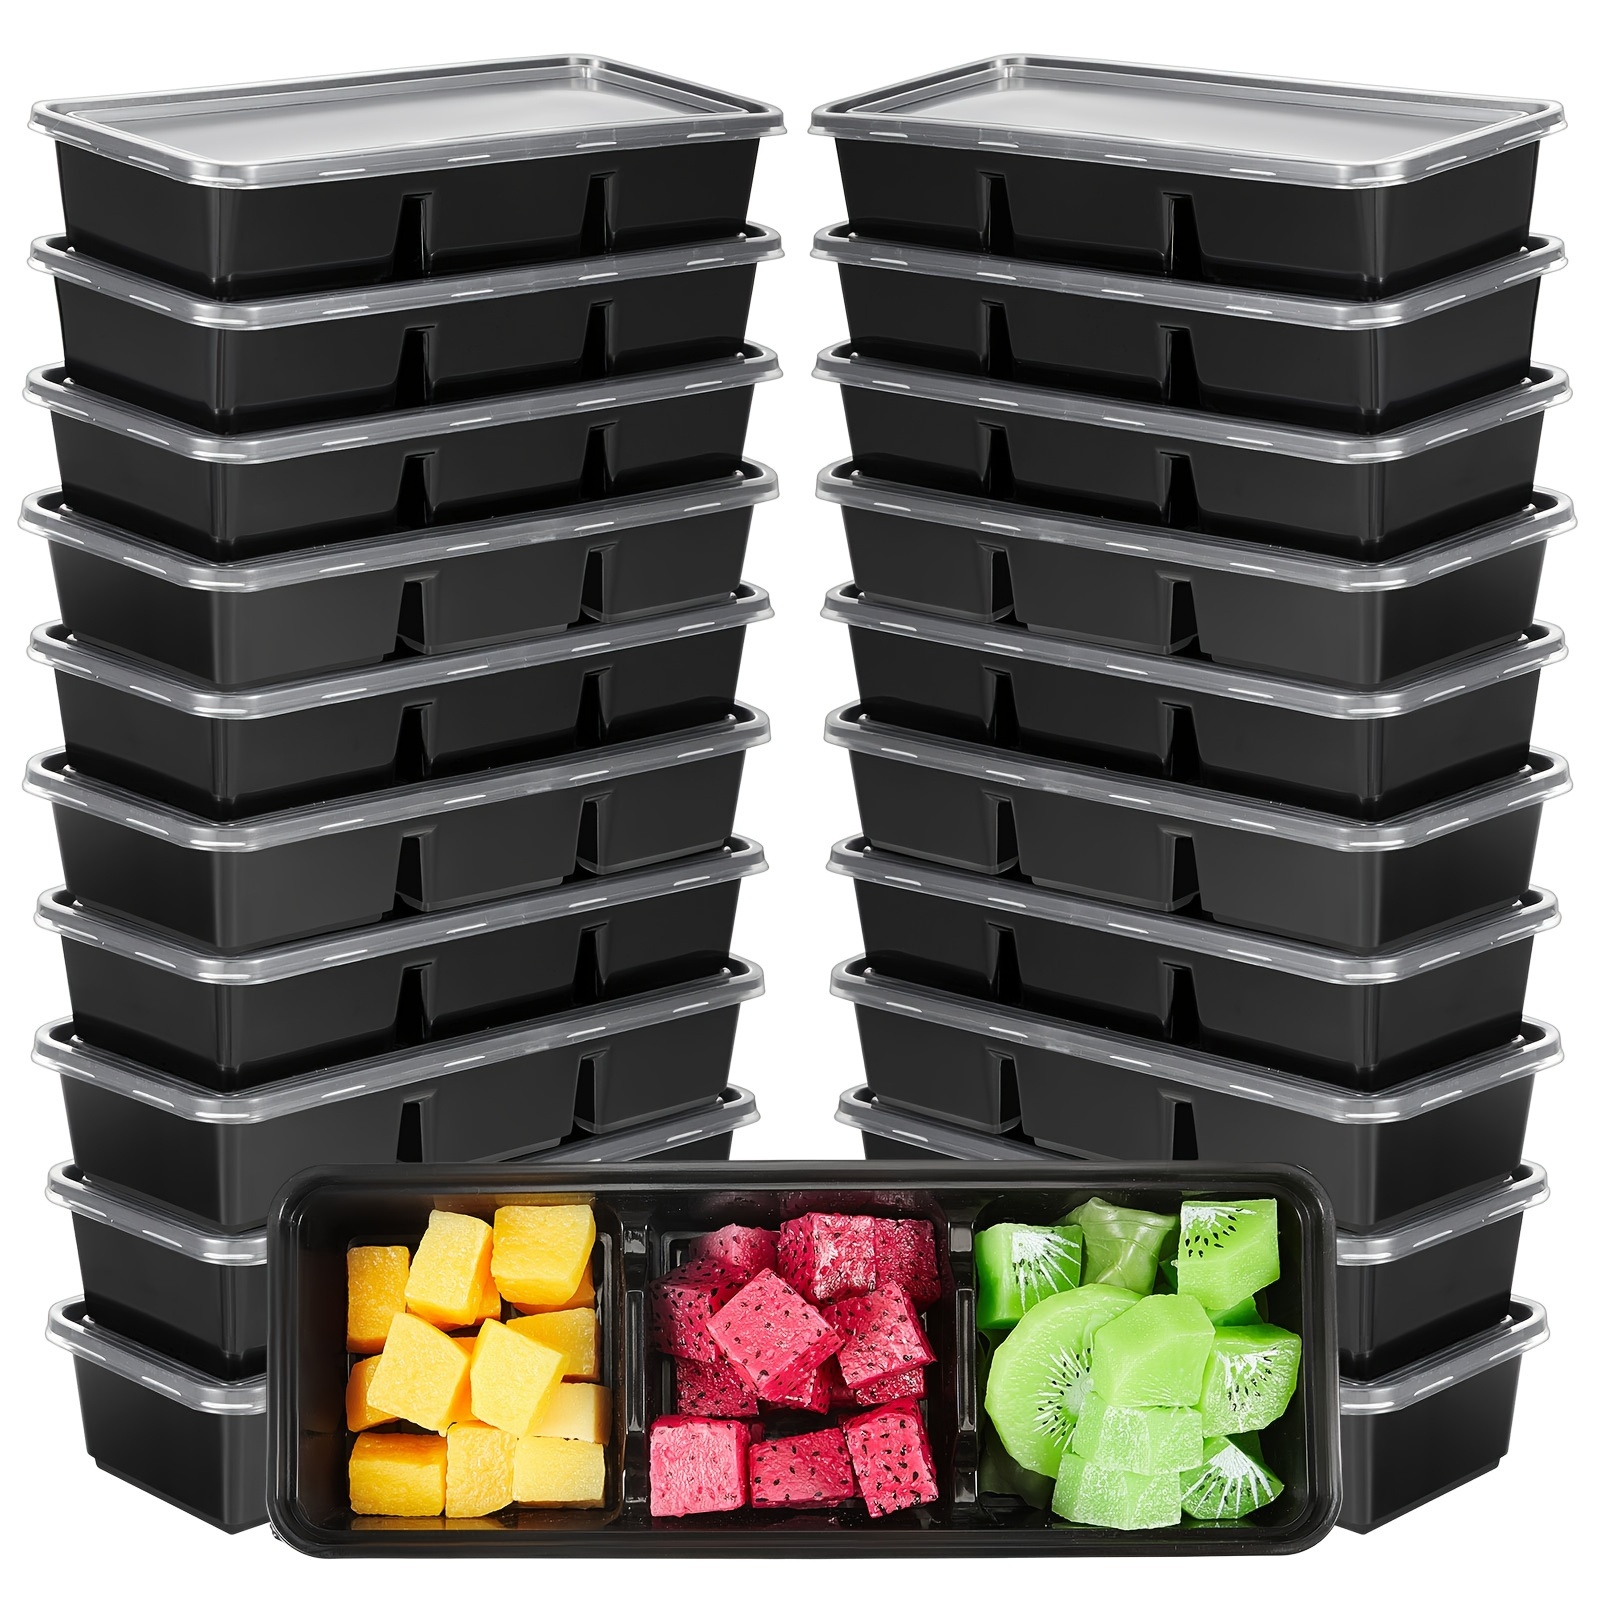 

Small Meal Prep Containers With 3 Compartments, Disposable Plastic Bento Boxes Reusable Stackable Food Containers Travel Lunch Boxes For Office, School, Picnic (black, 50 Pack)